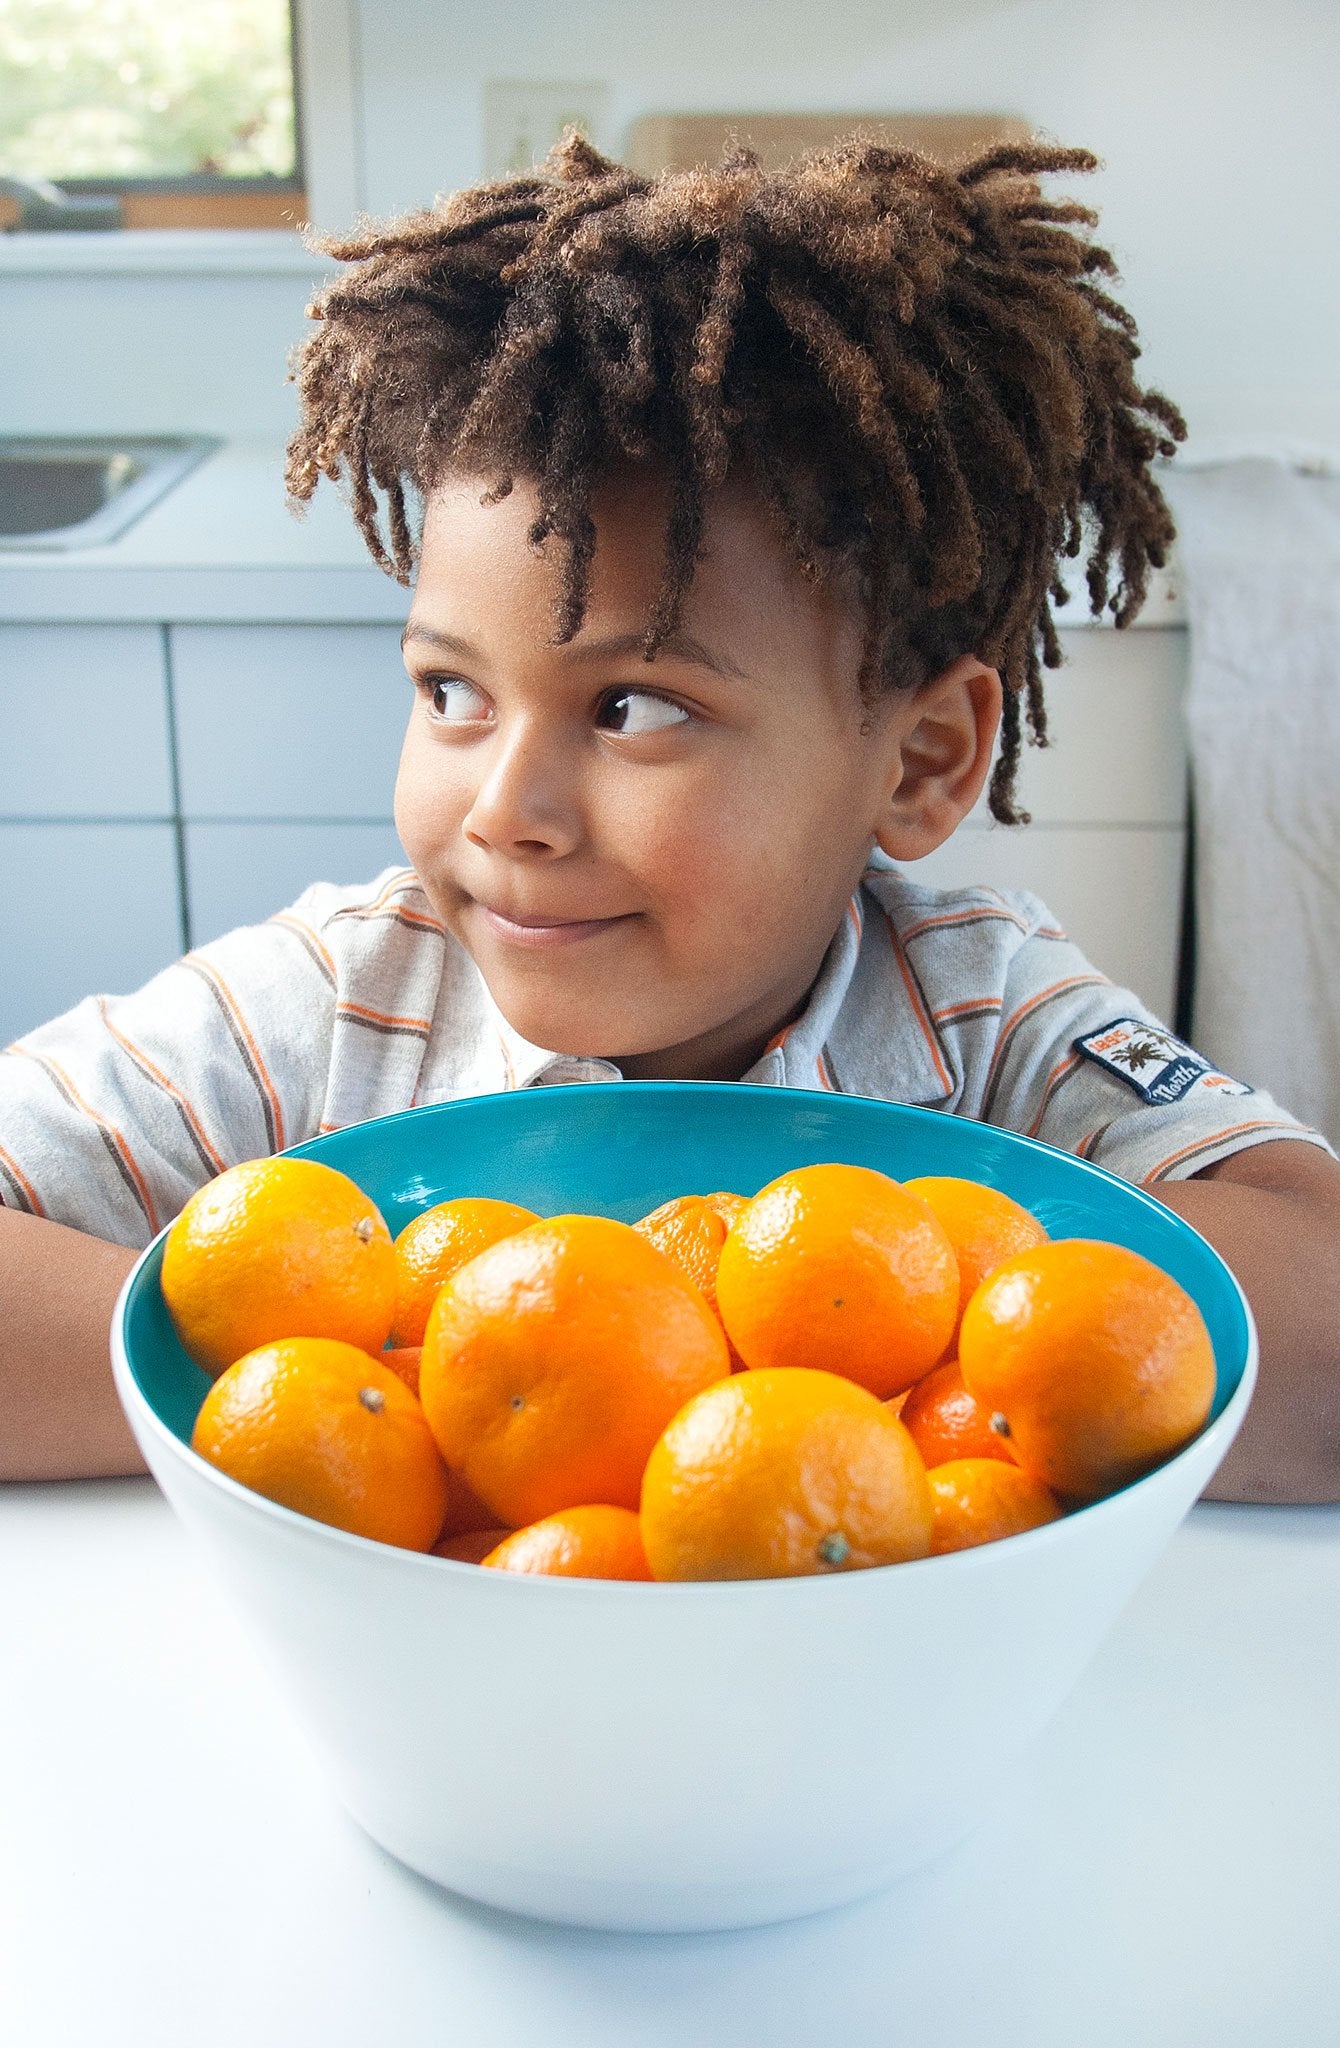 An African-American boy smiles in front of a a teal blue handblown glass bowl filled with clementines. Made in the USA from Serve Kindness.